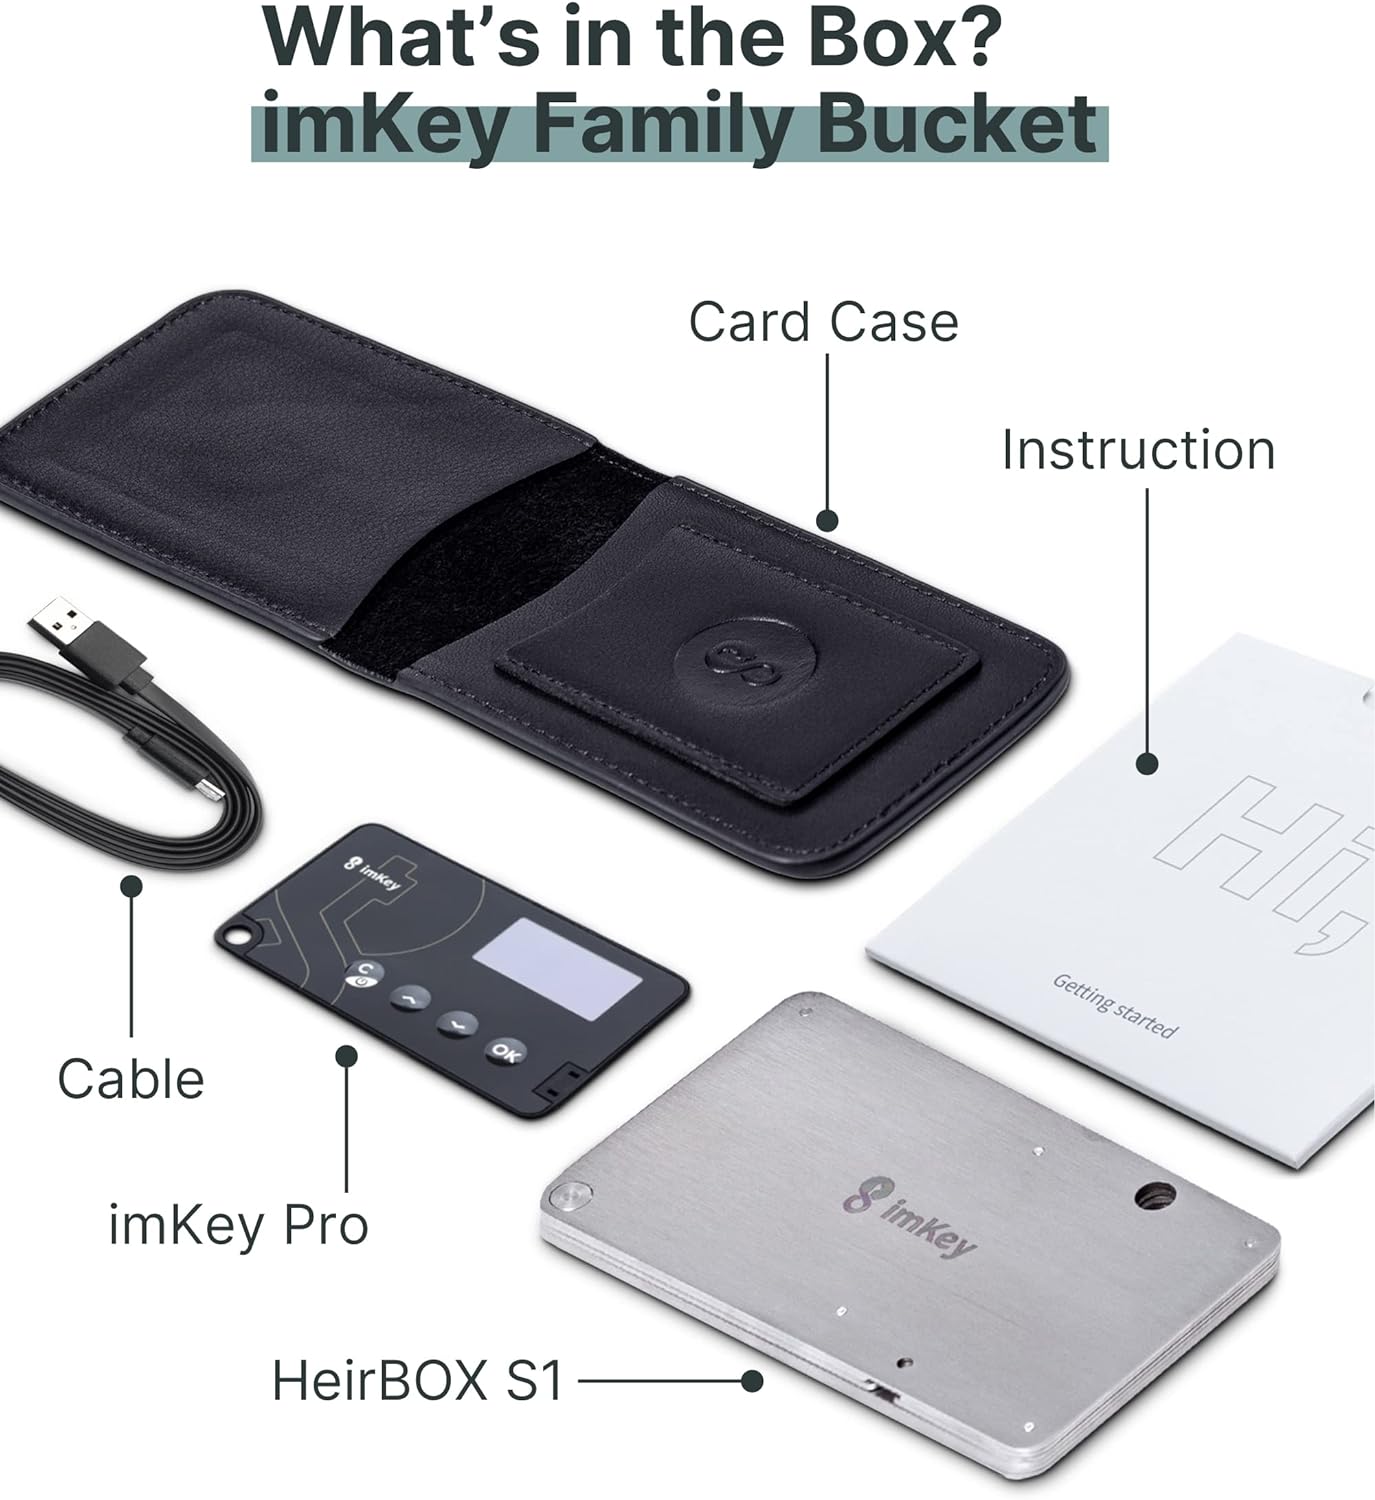 imKey Pro Crypto Hardware Wallet and Seed Phrase Storage Set, Offline Operates, Multi-Secure Device Supports, Safely Stores Your Crypto (Ethereum, Bitcoin, Litecoin, etc.), NFTs, Layer2, EVM, imKey